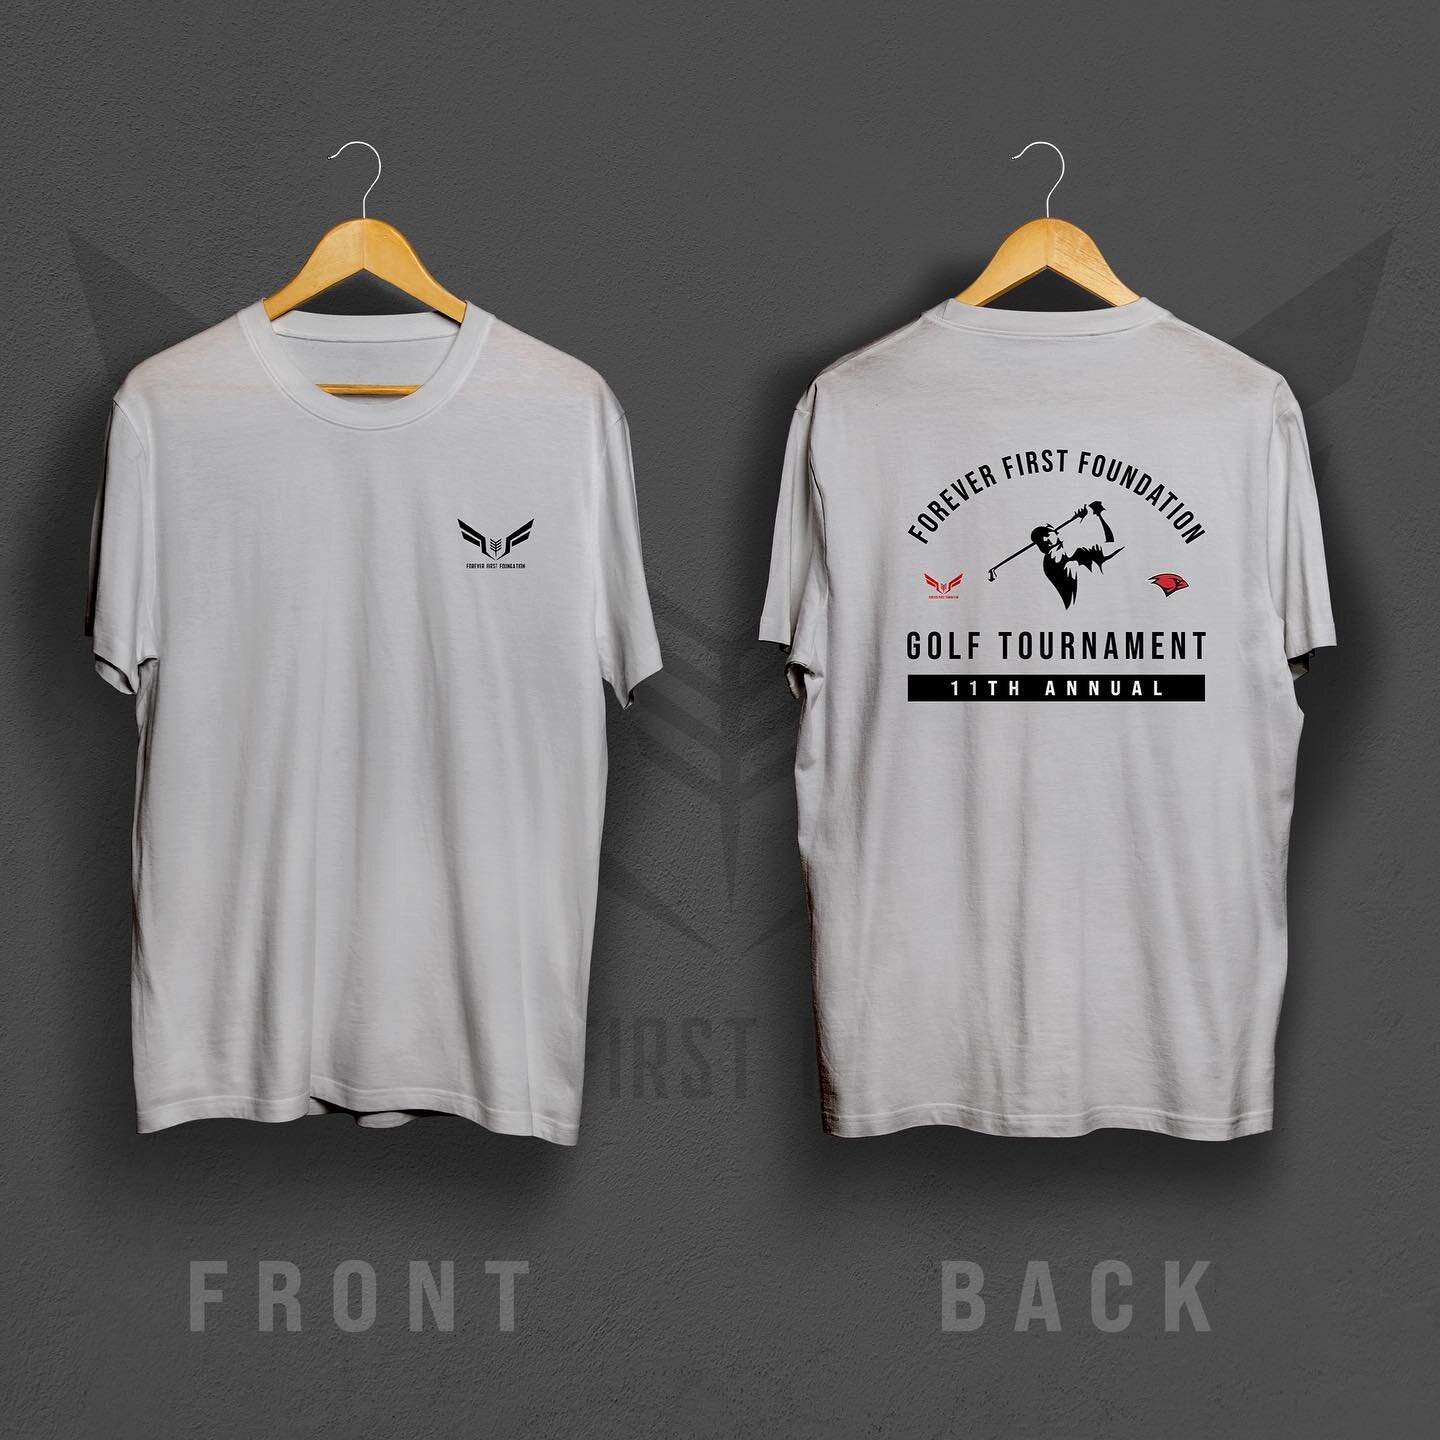 Really excited about the design of our 2023 Forever First Golf Tournament t-shirts! All participants of our June 17th golf tournament will receive this shirt as part of their gift bag. Huge shoutout to @botaaaron for designing these for us. 

Click o